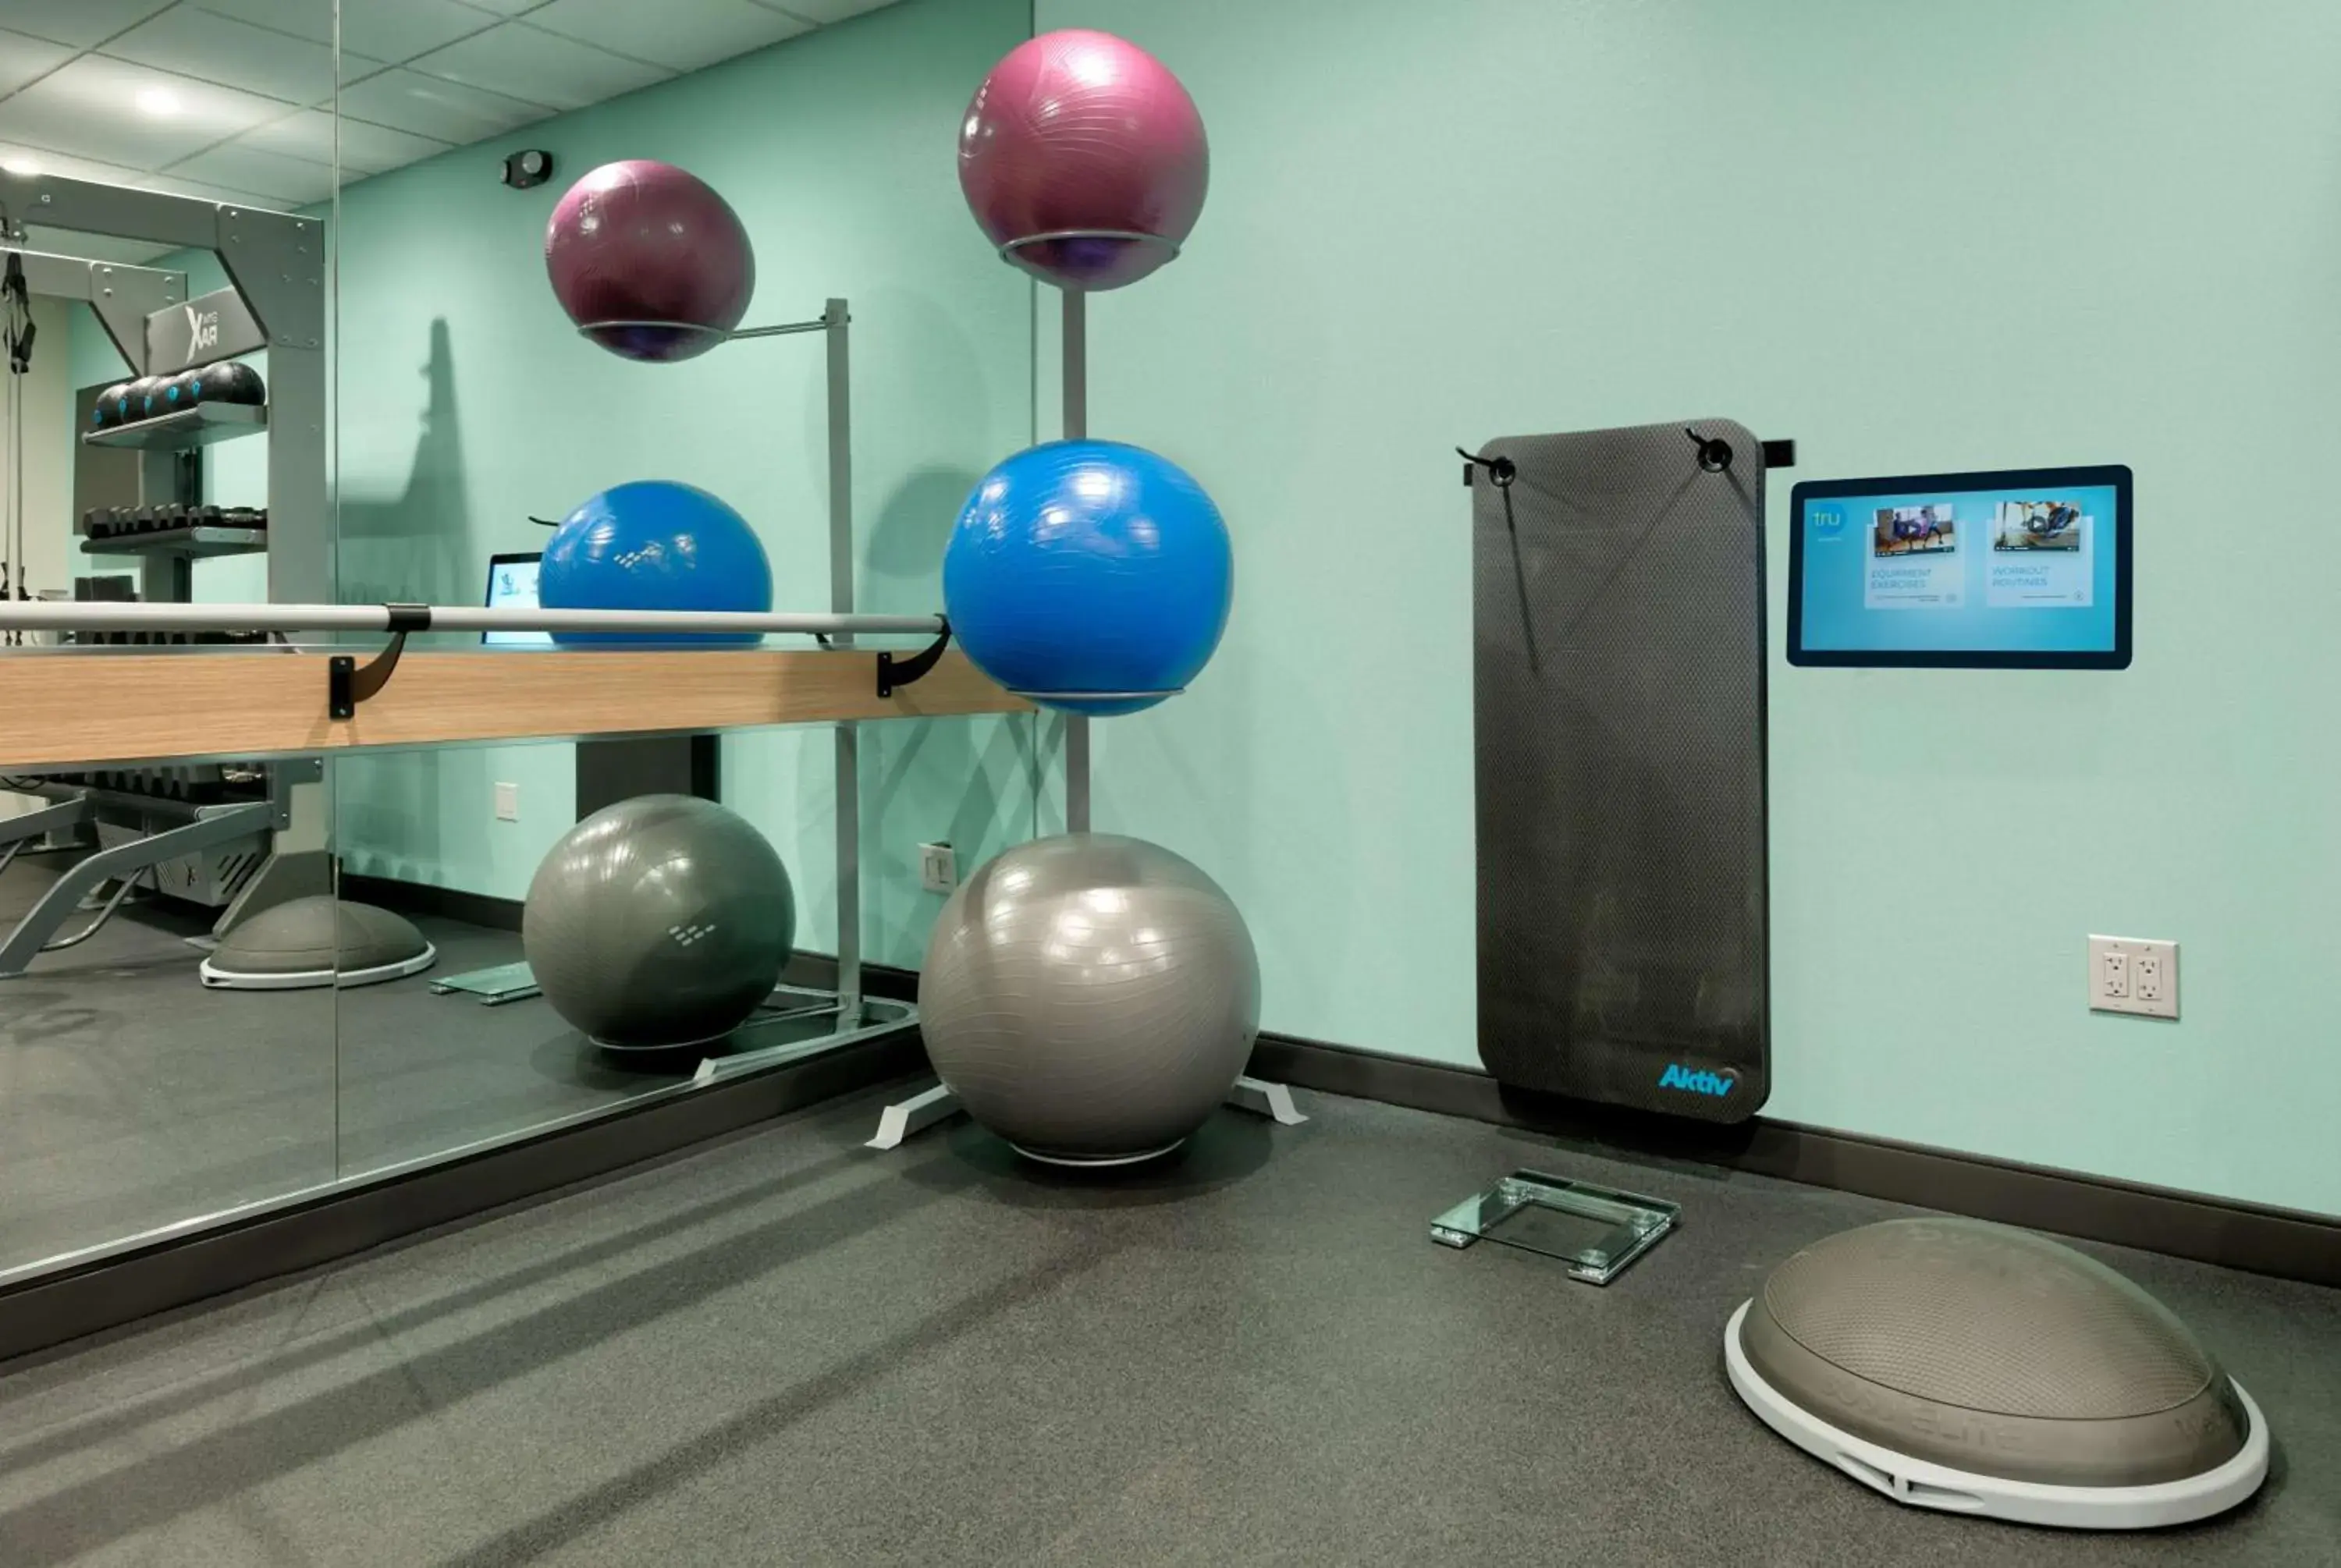 Fitness centre/facilities, Fitness Center/Facilities in Tru By Hilton Austin Nw Arboretum, Tx